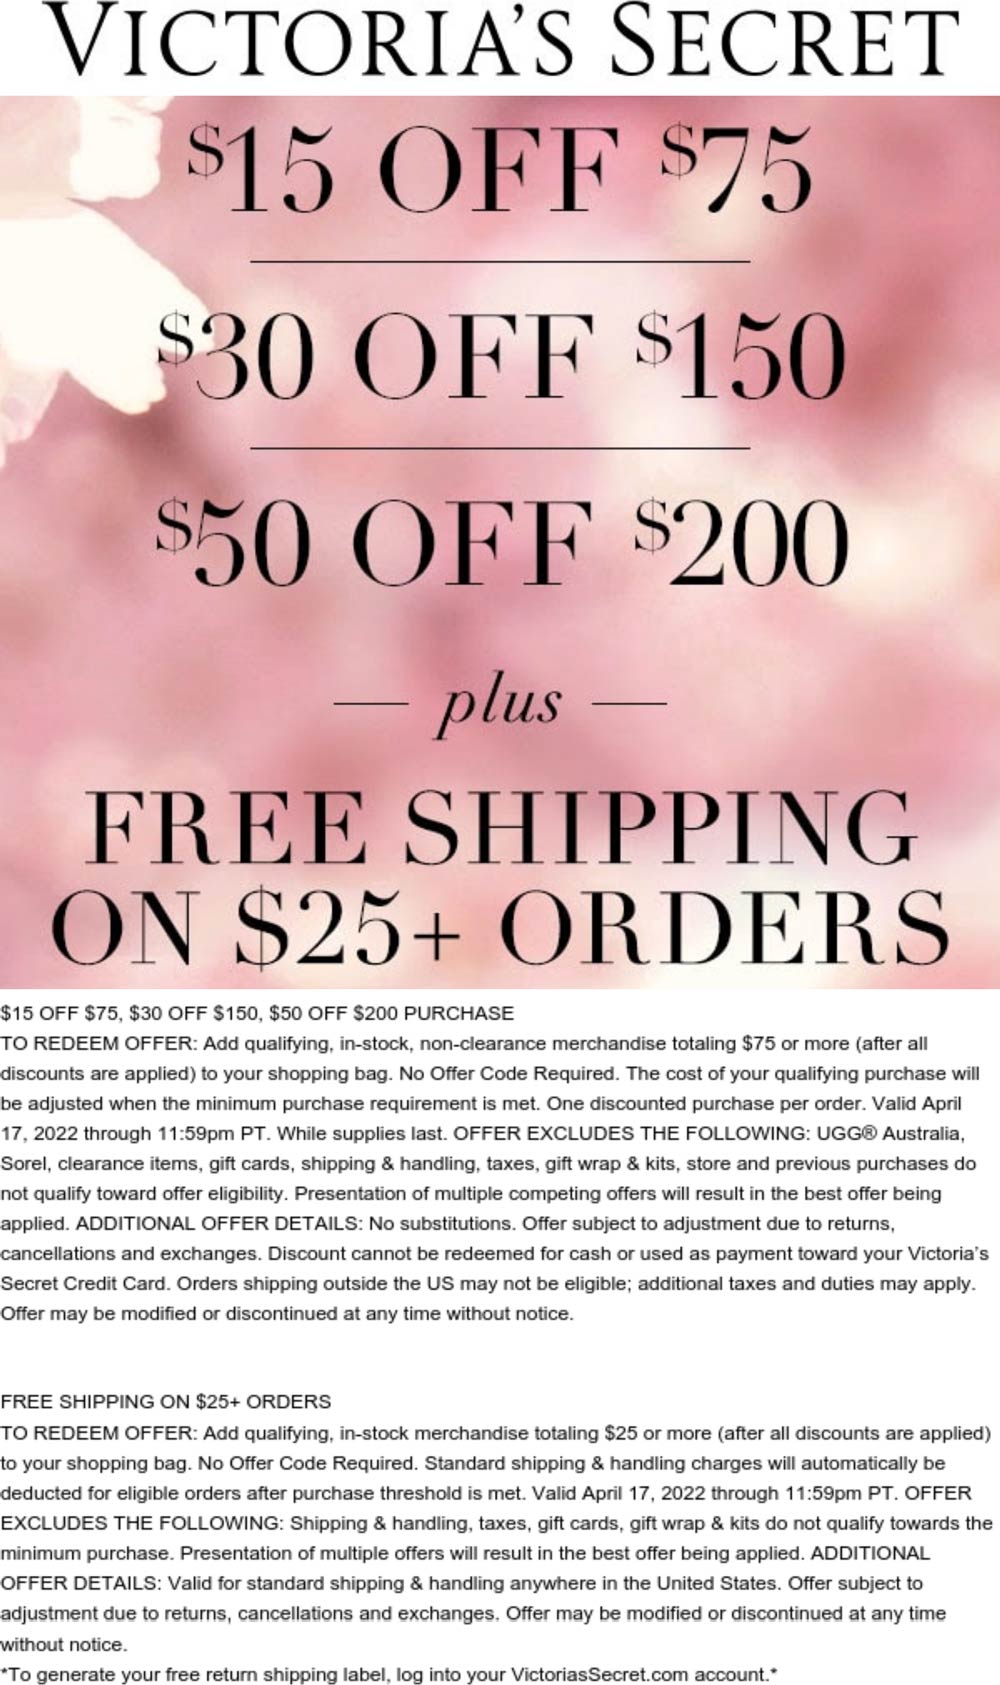 Victorias Secret stores Coupon  $15 off $75 & more today online at Victorias Secret #victoriassecret 